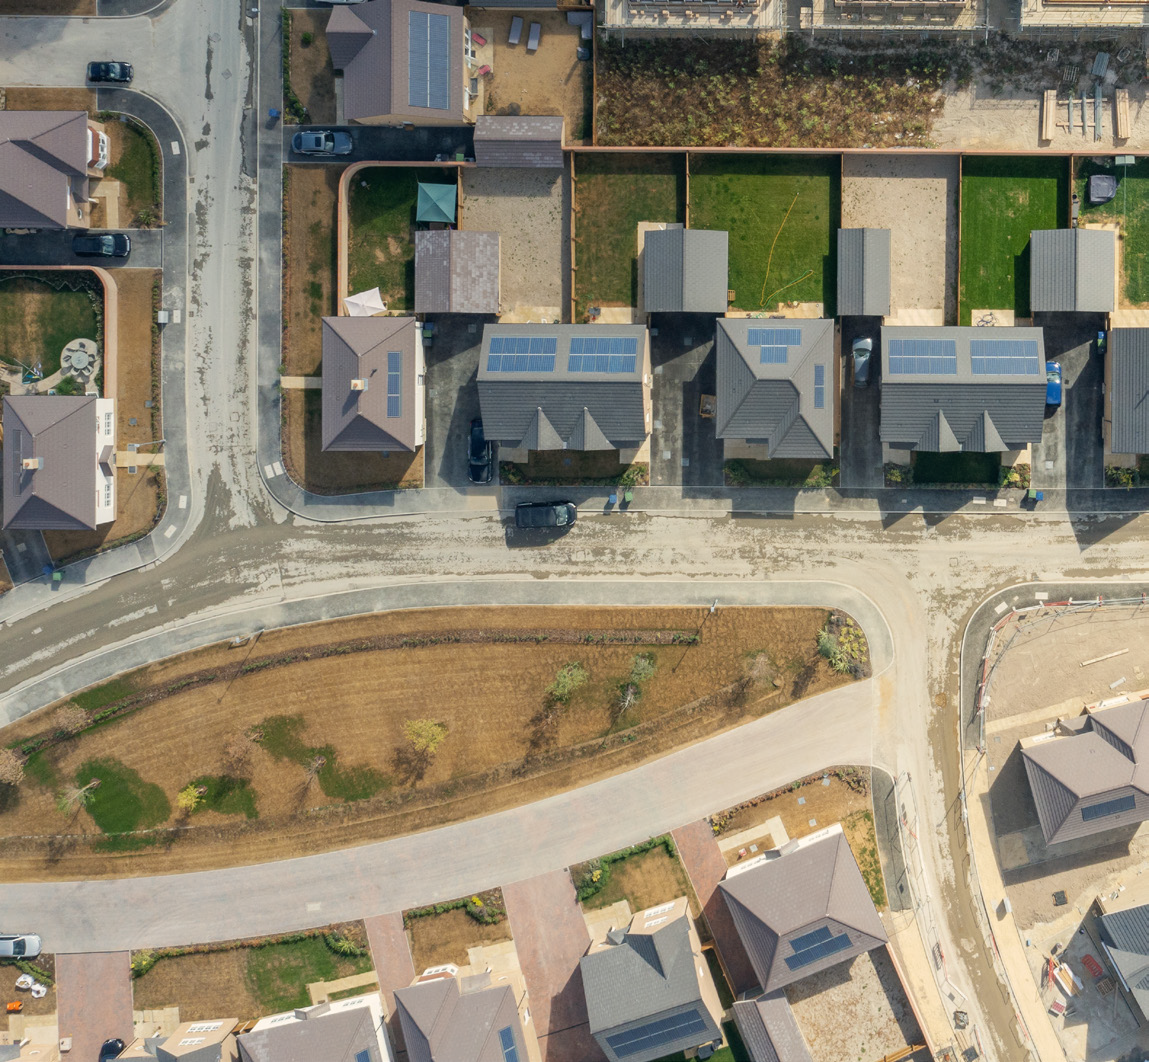 Drone view of houses. The houses are being built with solar panels on the roof - sustainable living